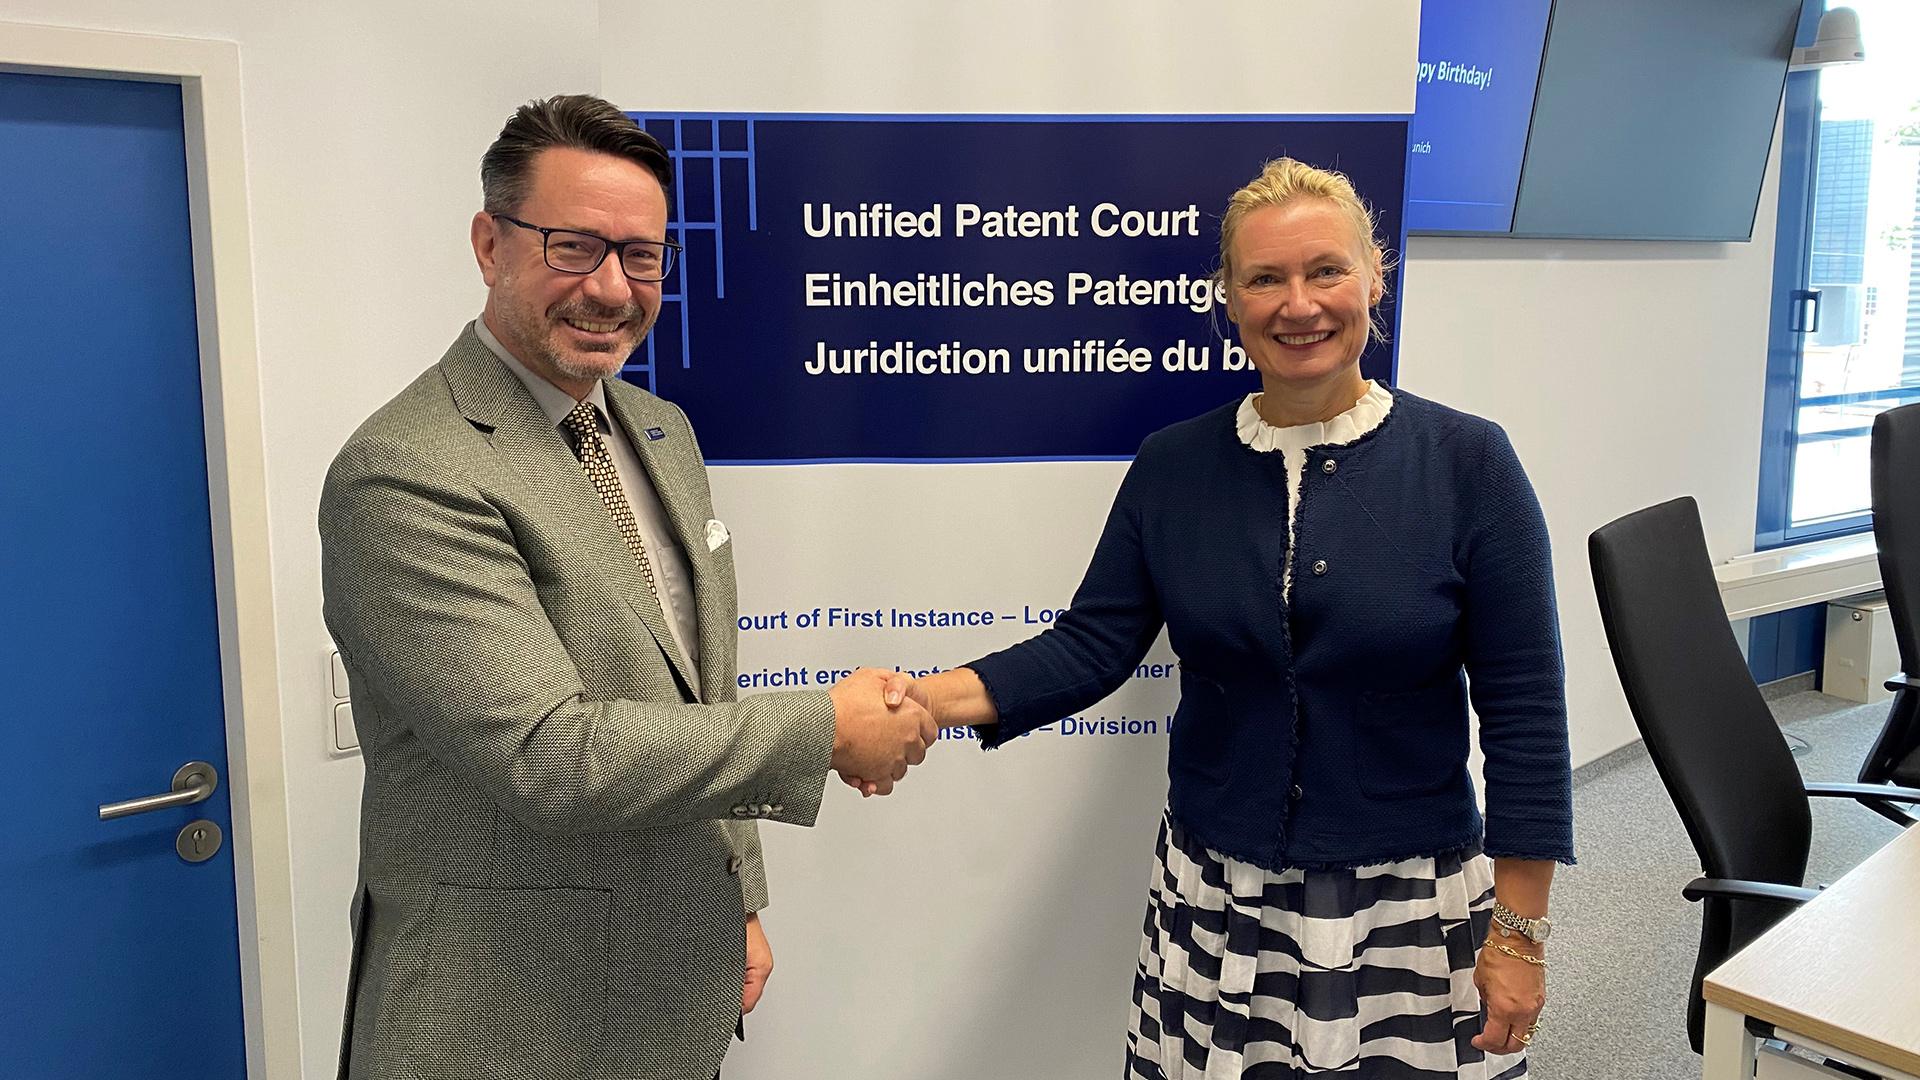 Dr Matthias Zigann, Presiding Judge of the Munich local Division of the Unified Patent Court (left) with Heli Pihlajamaa, Principal Director Patent Law and Procedures, EPO.